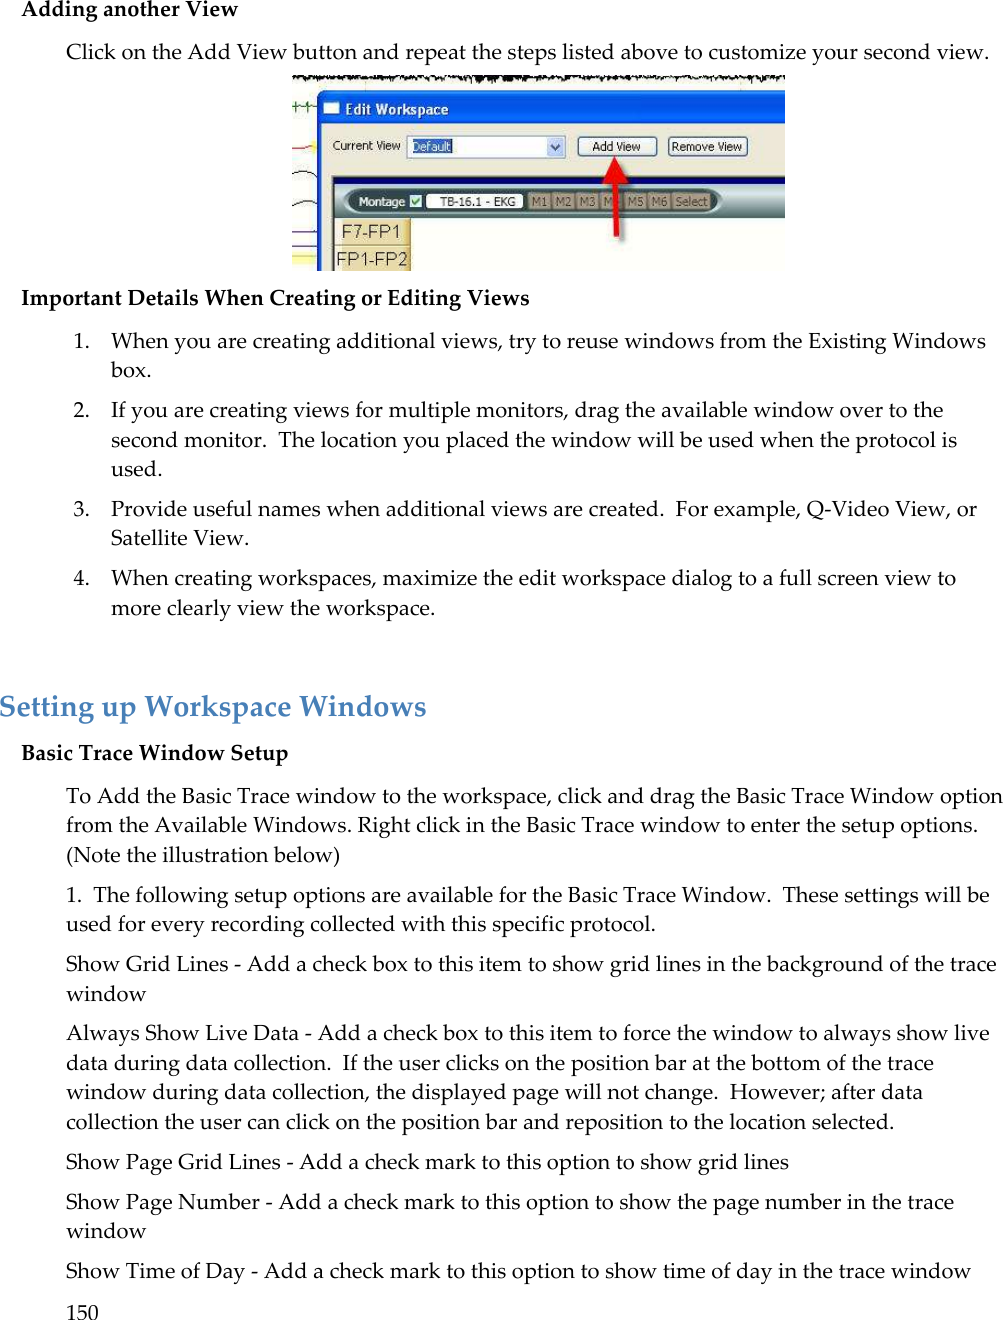 150   Adding another View Click on the Add View button and repeat the steps listed above to customize your second view.  Important Details When Creating or Editing Views 1. When you are creating additional views, try to reuse windows from the Existing Windows box. 2. If you are creating views for multiple monitors, drag the available window over to the second monitor.  The location you placed the window will be used when the protocol is used. 3. Provide useful names when additional views are created.  For example, Q-Video View, or Satellite View. 4. When creating workspaces, maximize the edit workspace dialog to a full screen view to more clearly view the workspace.  Setting up Workspace Windows Basic Trace Window Setup  To Add the Basic Trace window to the workspace, click and drag the Basic Trace Window option from the Available Windows. Right click in the Basic Trace window to enter the setup options.  (Note the illustration below) 1.  The following setup options are available for the Basic Trace Window.  These settings will be used for every recording collected with this specific protocol. Show Grid Lines - Add a check box to this item to show grid lines in the background of the trace window Always Show Live Data - Add a check box to this item to force the window to always show live data during data collection.  If the user clicks on the position bar at the bottom of the trace window during data collection, the displayed page will not change.  However; after data collection the user can click on the position bar and reposition to the location selected. Show Page Grid Lines - Add a check mark to this option to show grid lines Show Page Number - Add a check mark to this option to show the page number in the trace window Show Time of Day - Add a check mark to this option to show time of day in the trace window 